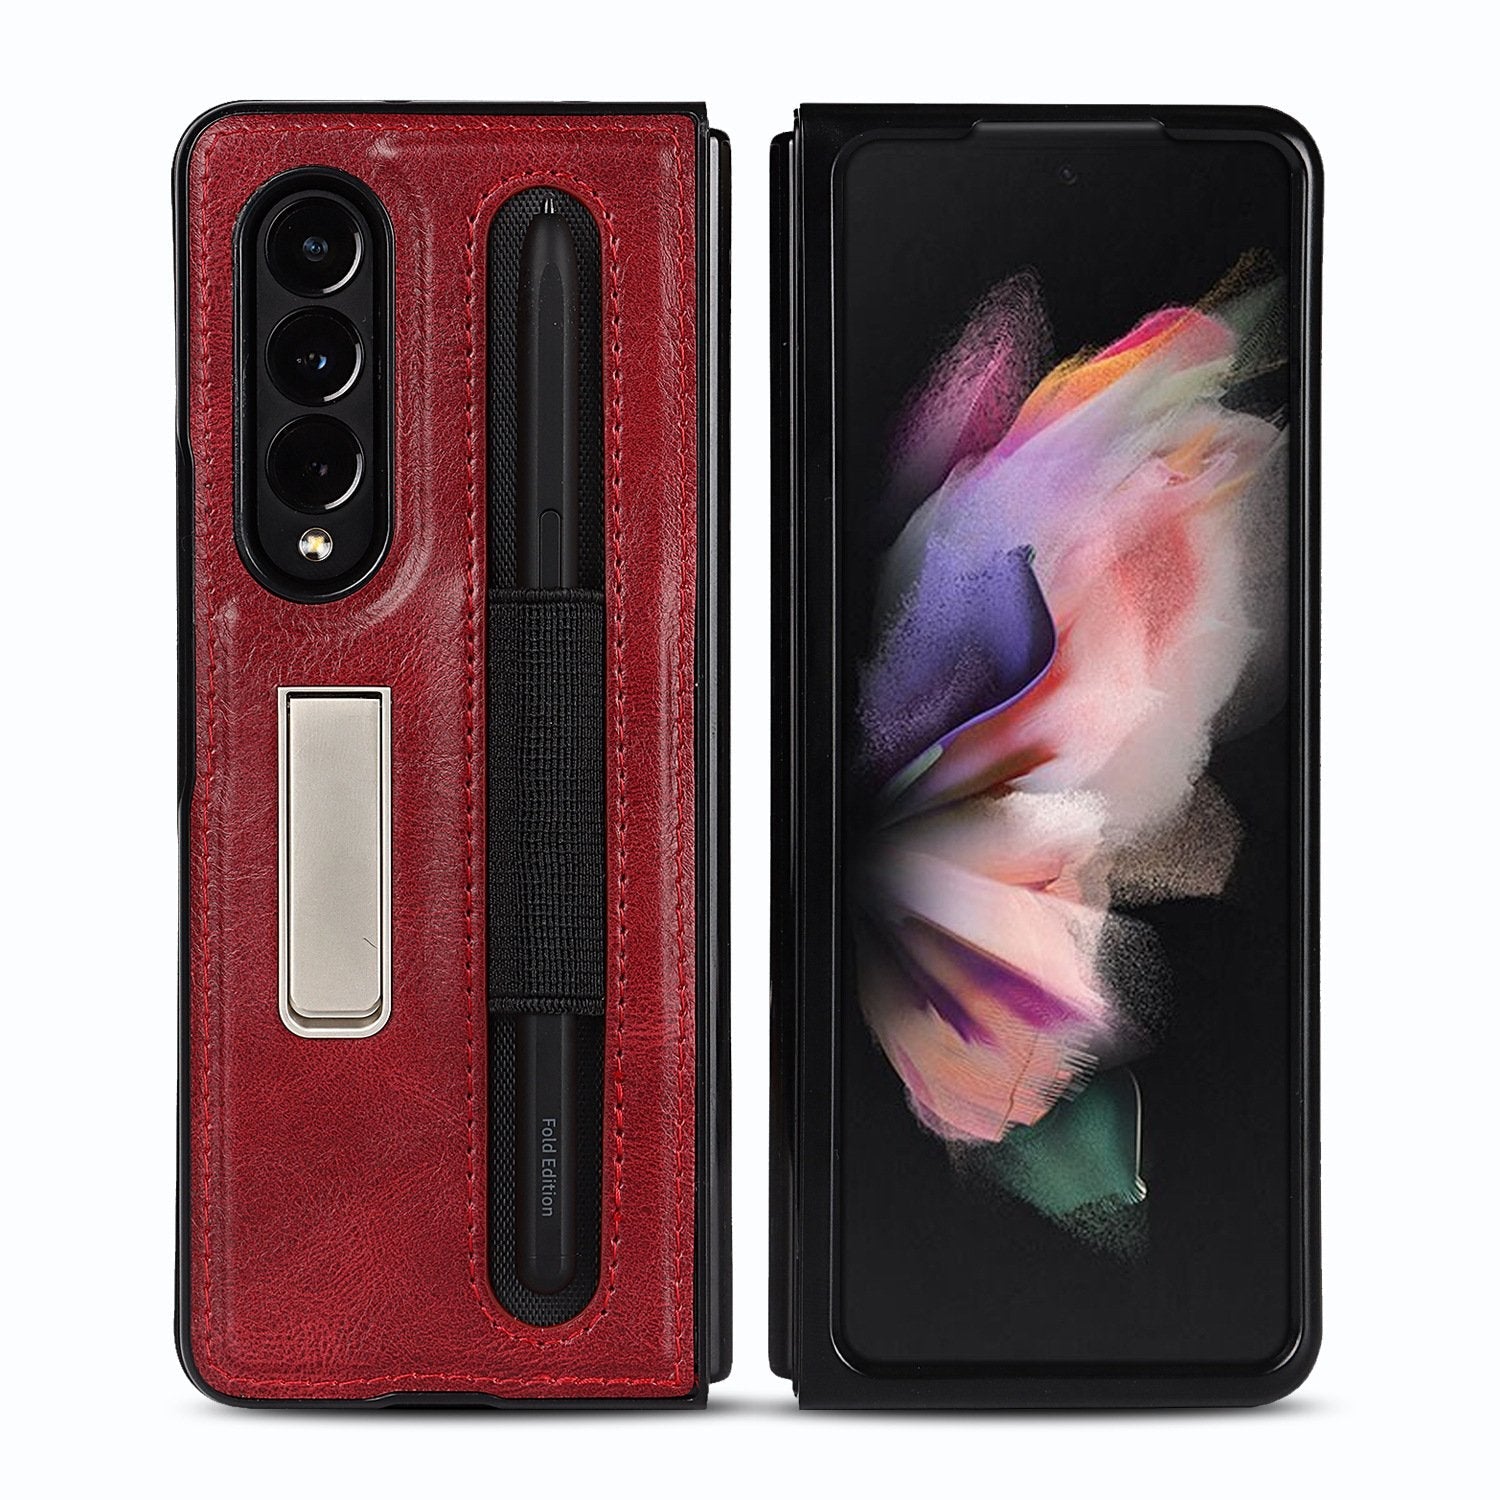 samsung z fold3 mobile phone case galaxy fold 3 5g with spen pen case holder protective cover3ssto